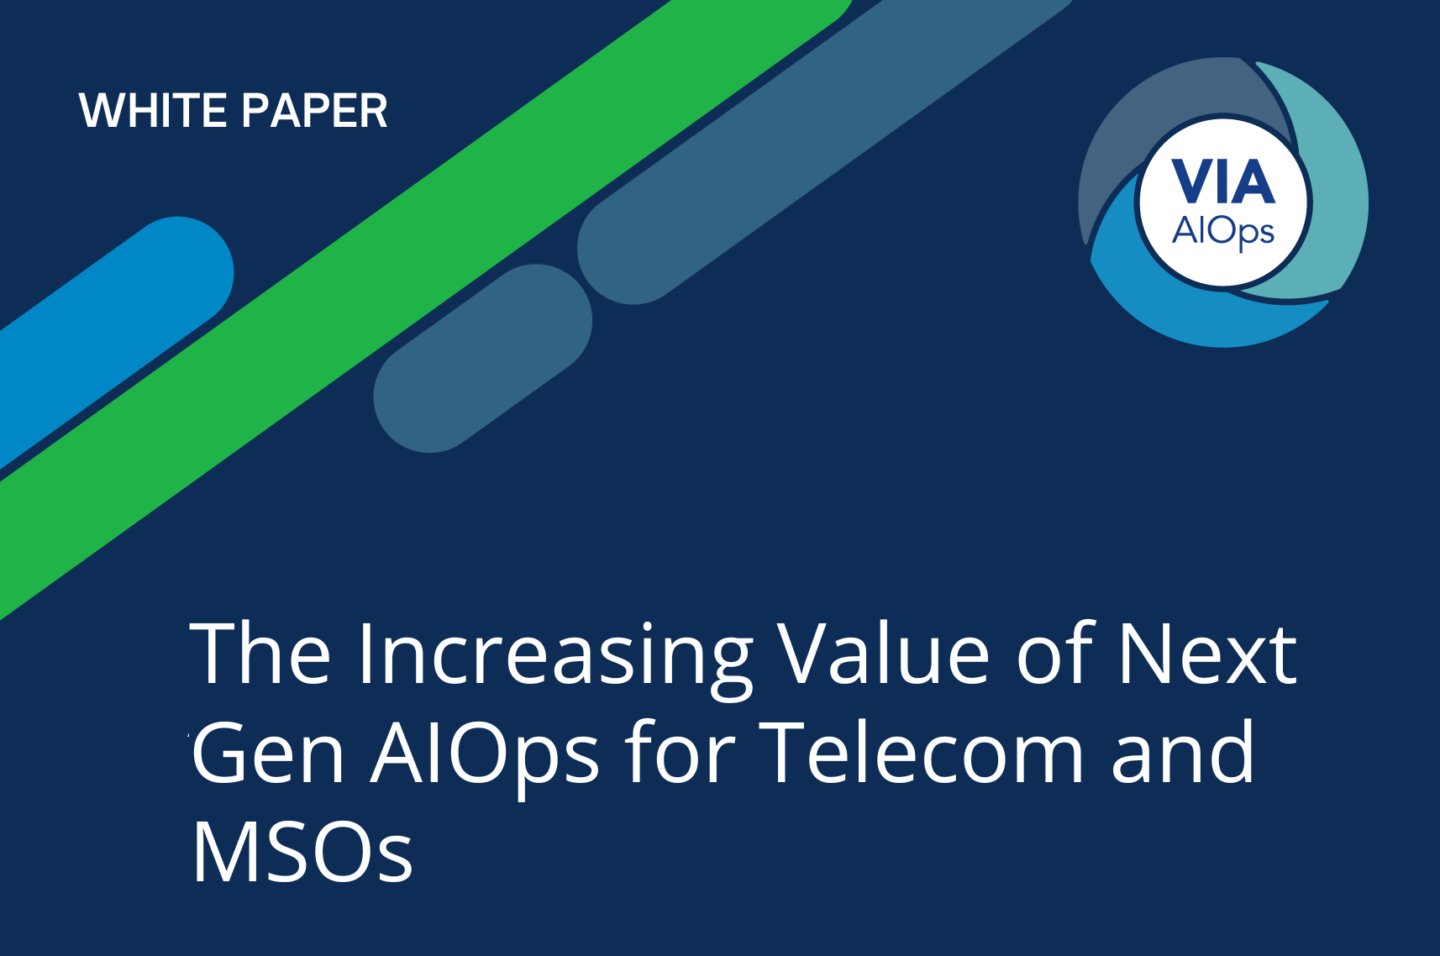 Banner for The Increasing Value of Next Gen AIOps for Telecom and MSOs